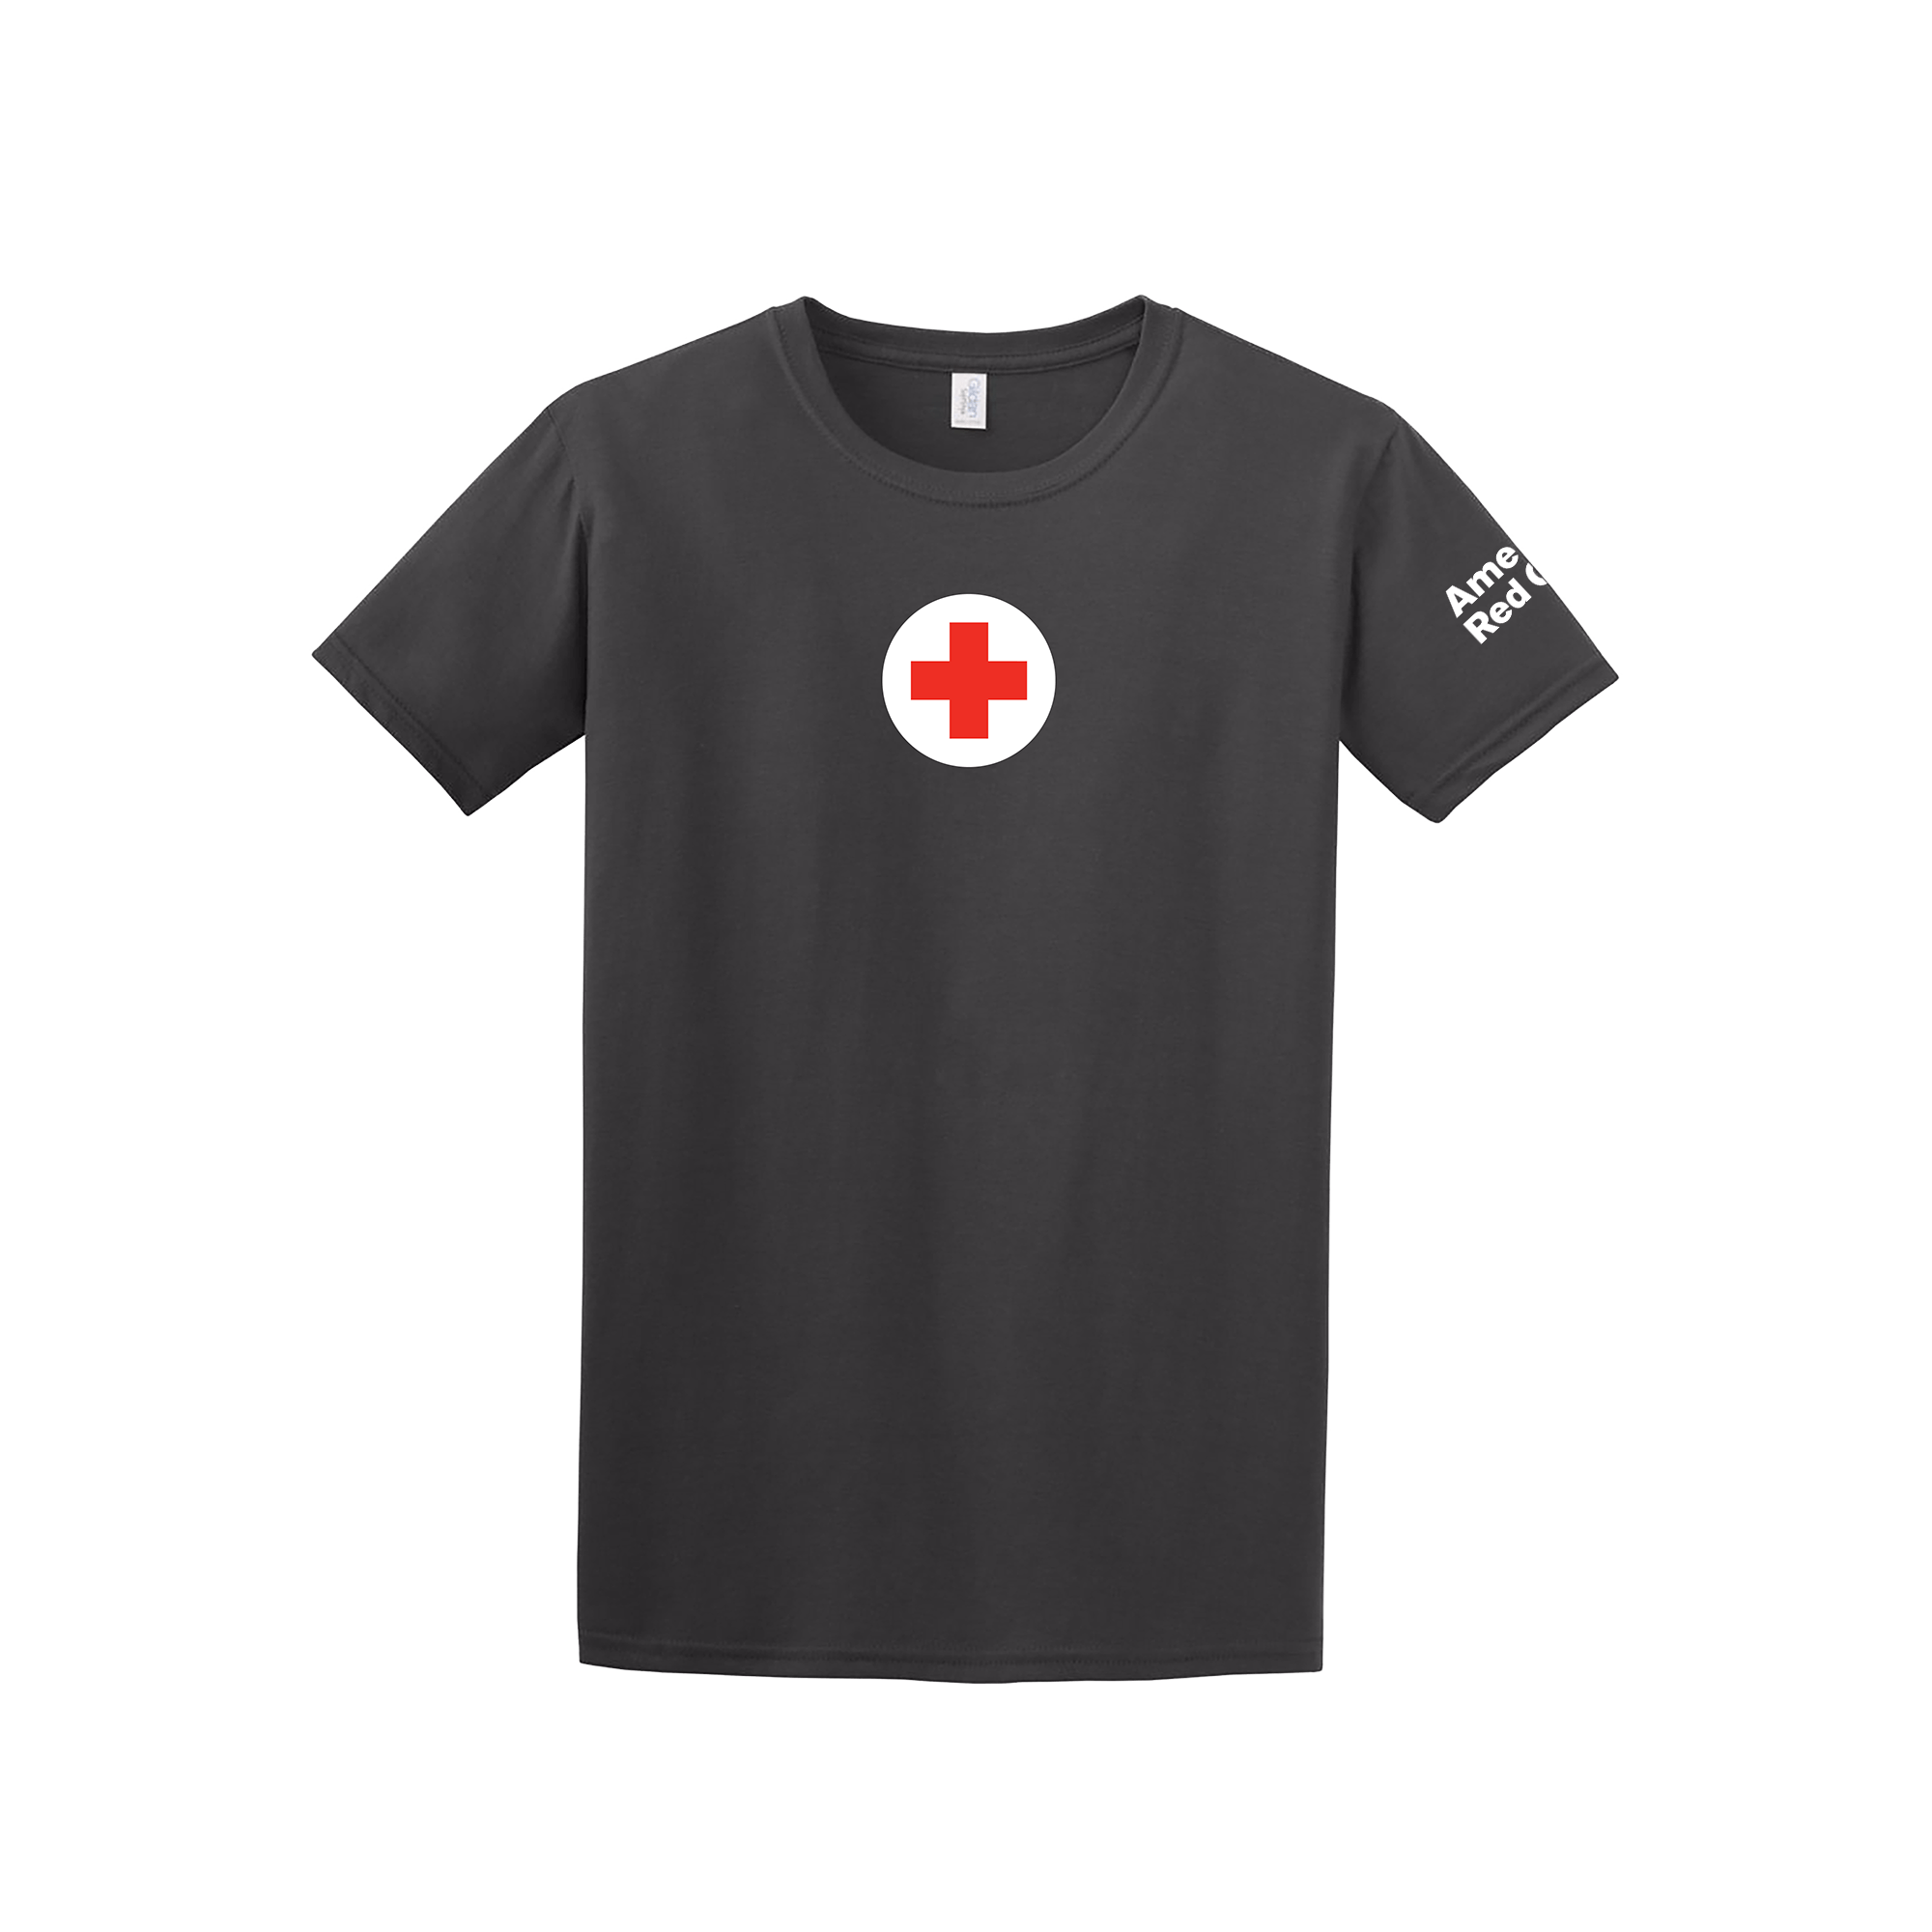 T and Red Cross Logo - Unisex 100% Cotton T Shirt With ARC Logo. Red Cross Store